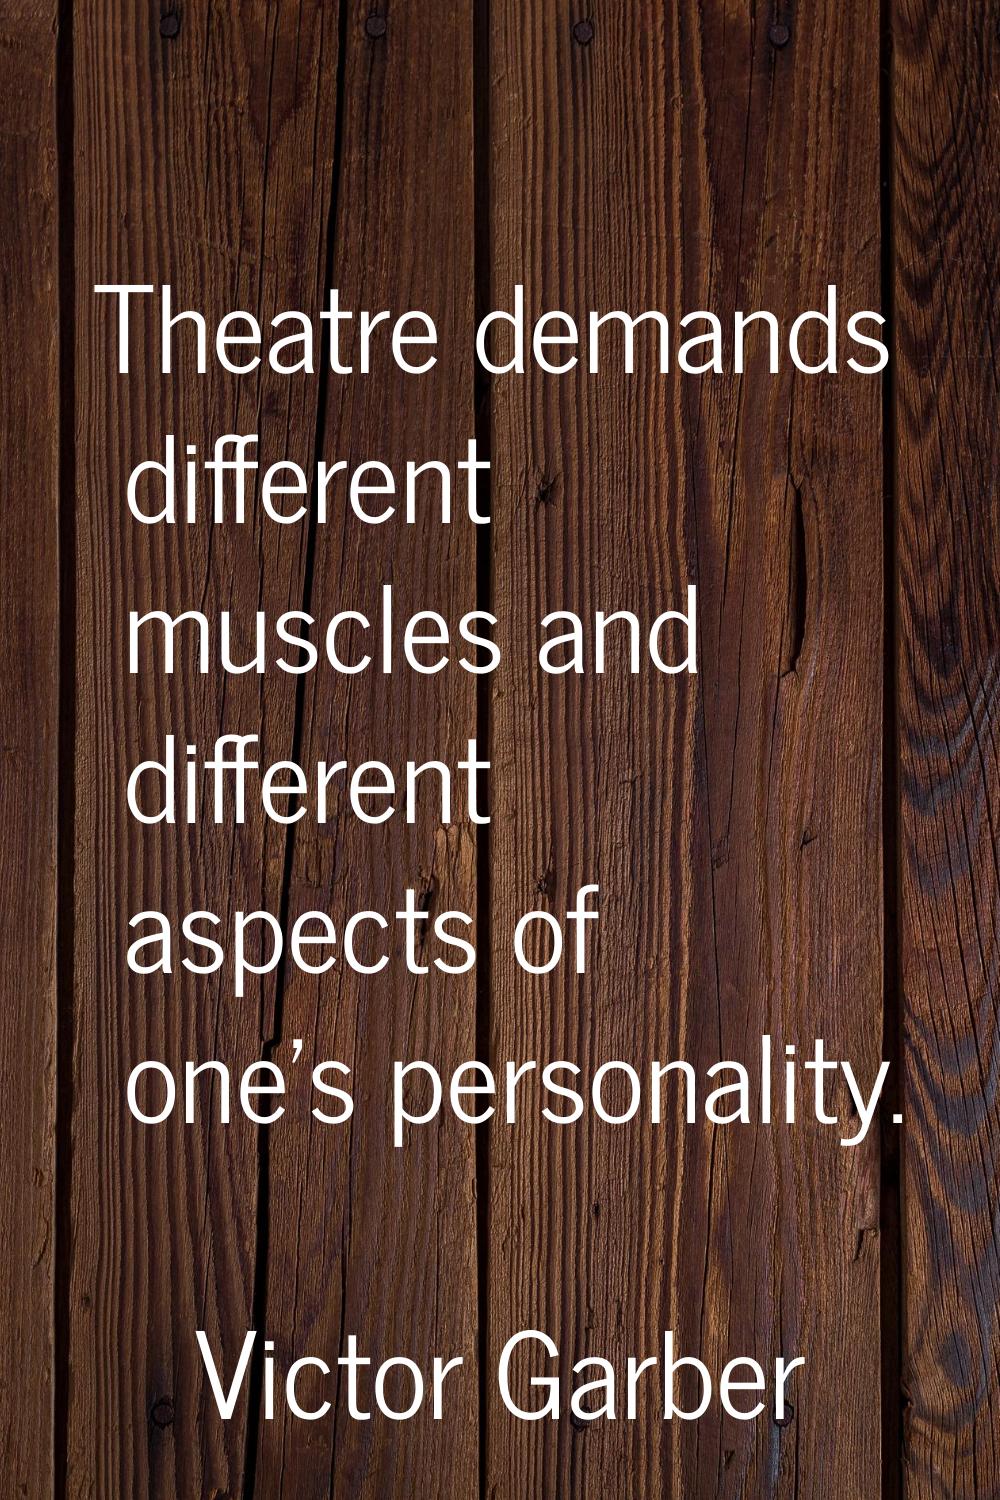 Theatre demands different muscles and different aspects of one's personality.